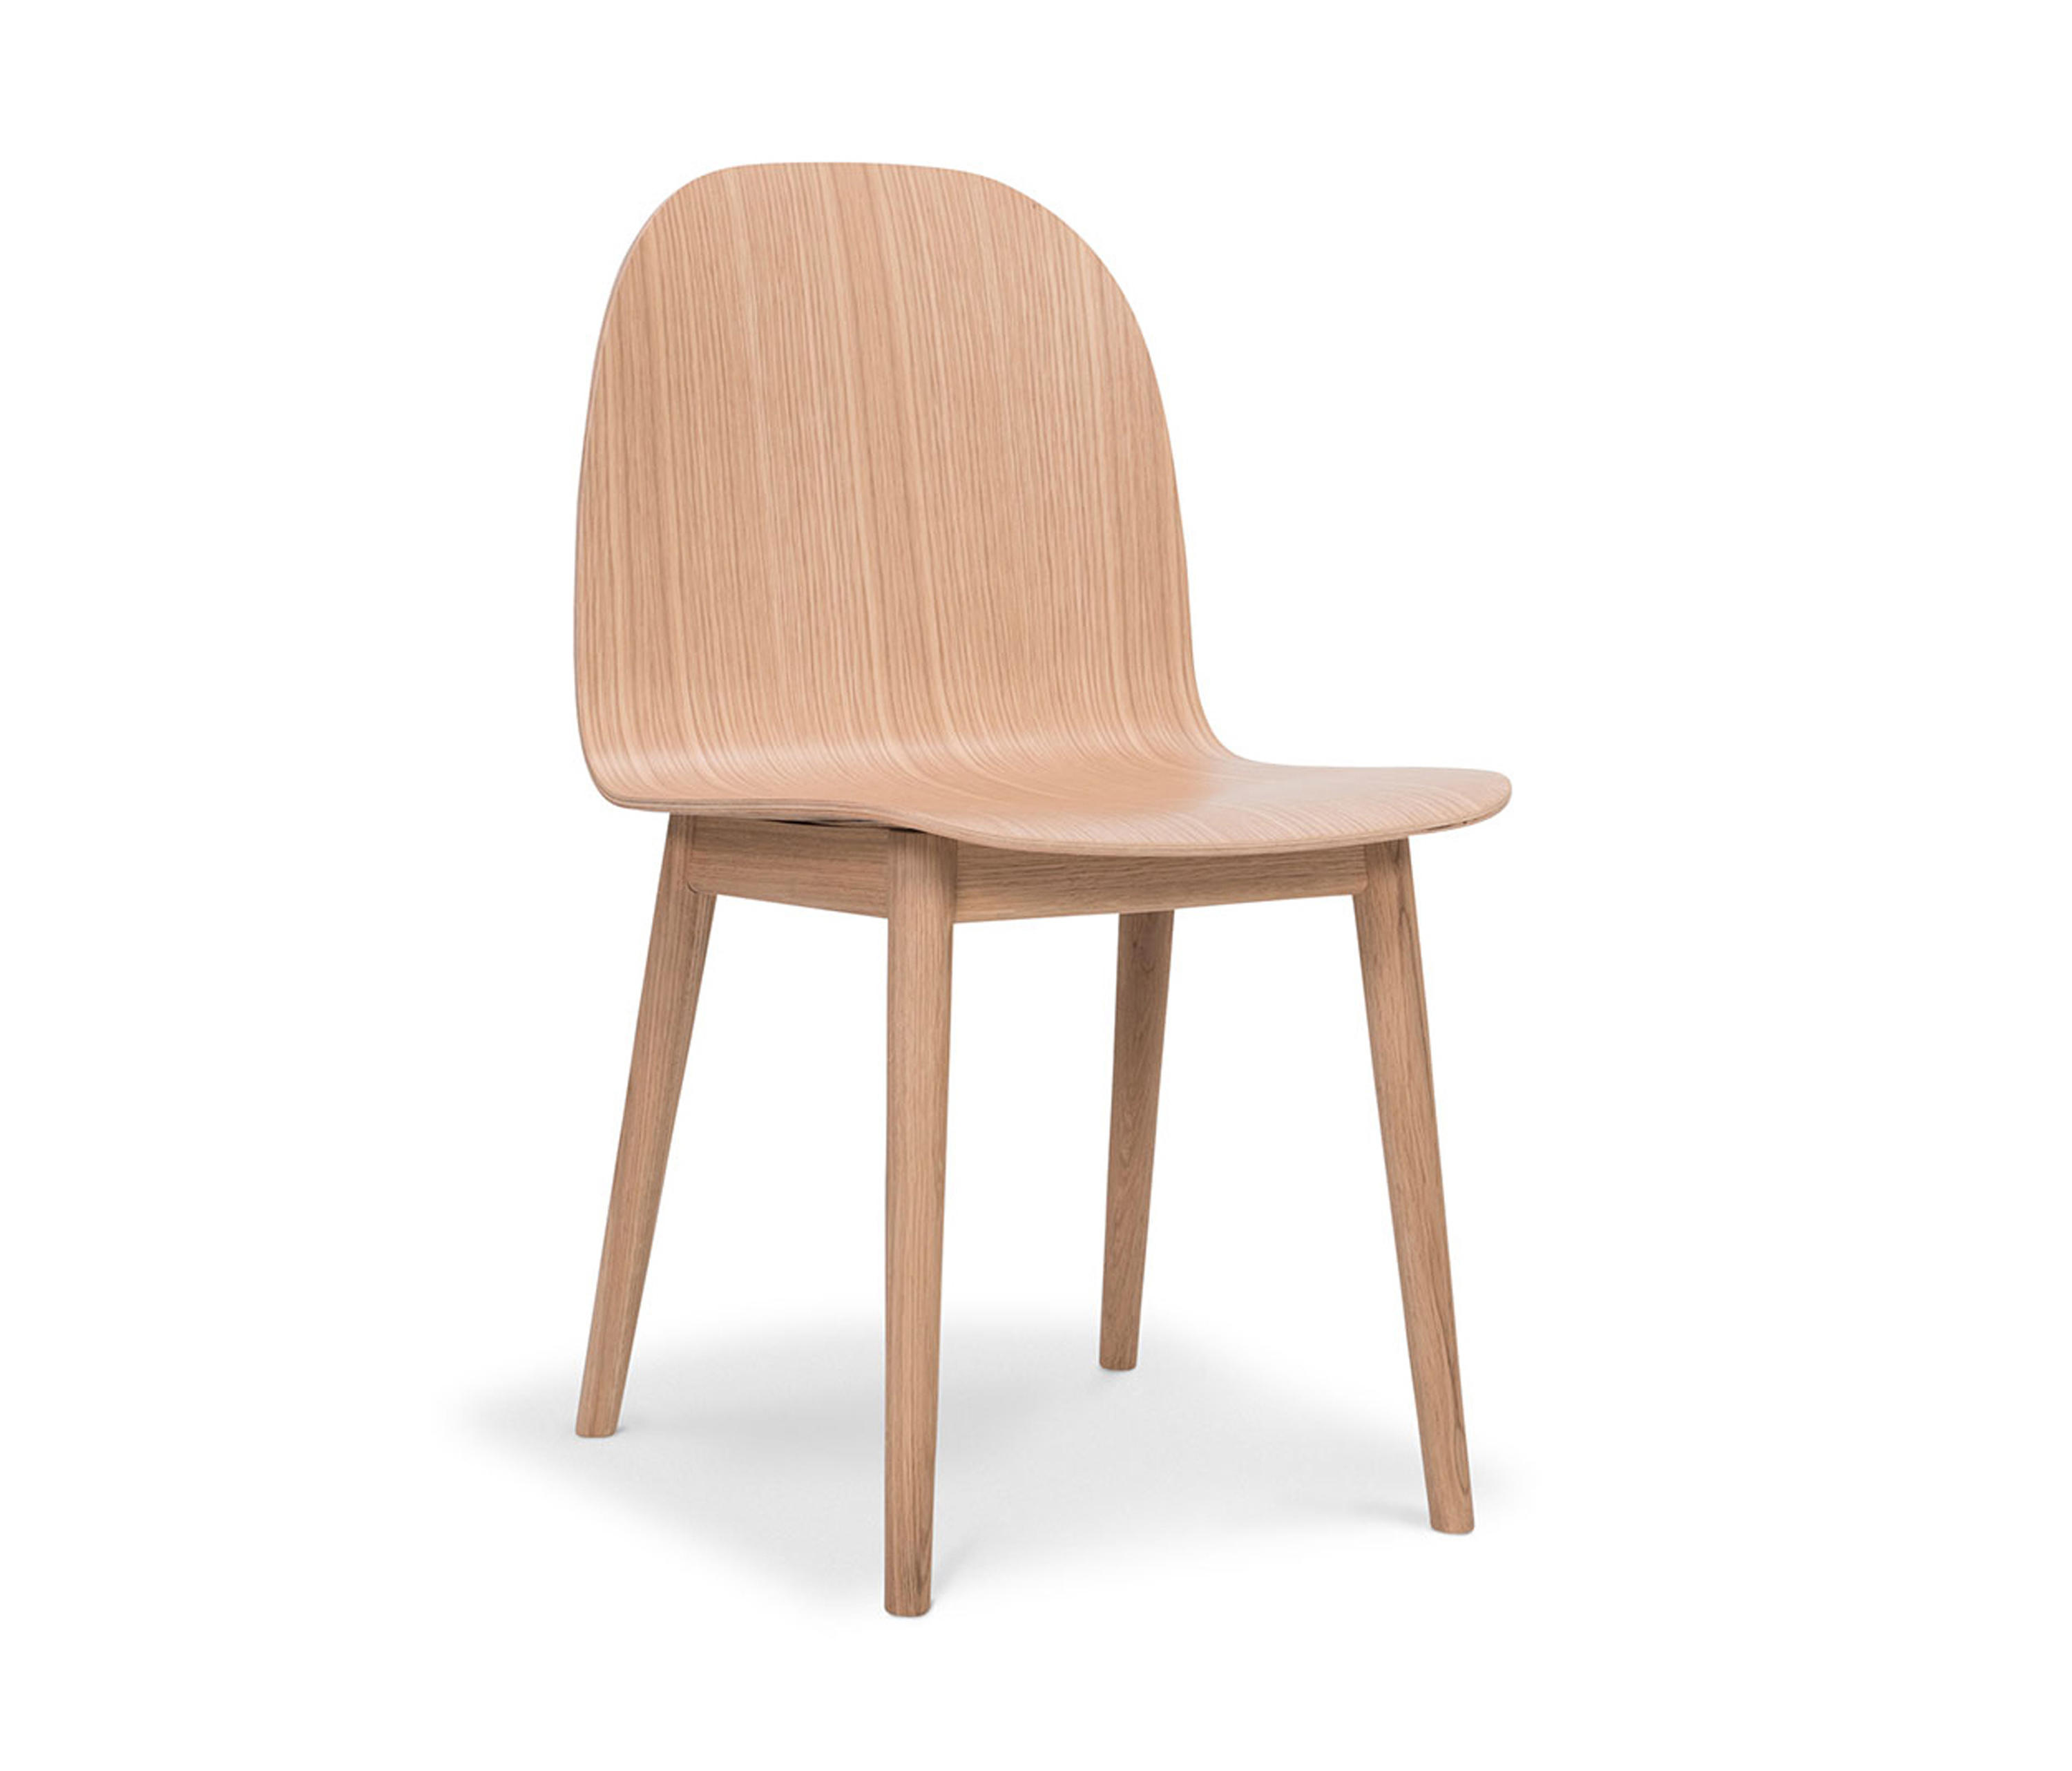 EVERYDAY - Chairs from Modus | Architonic